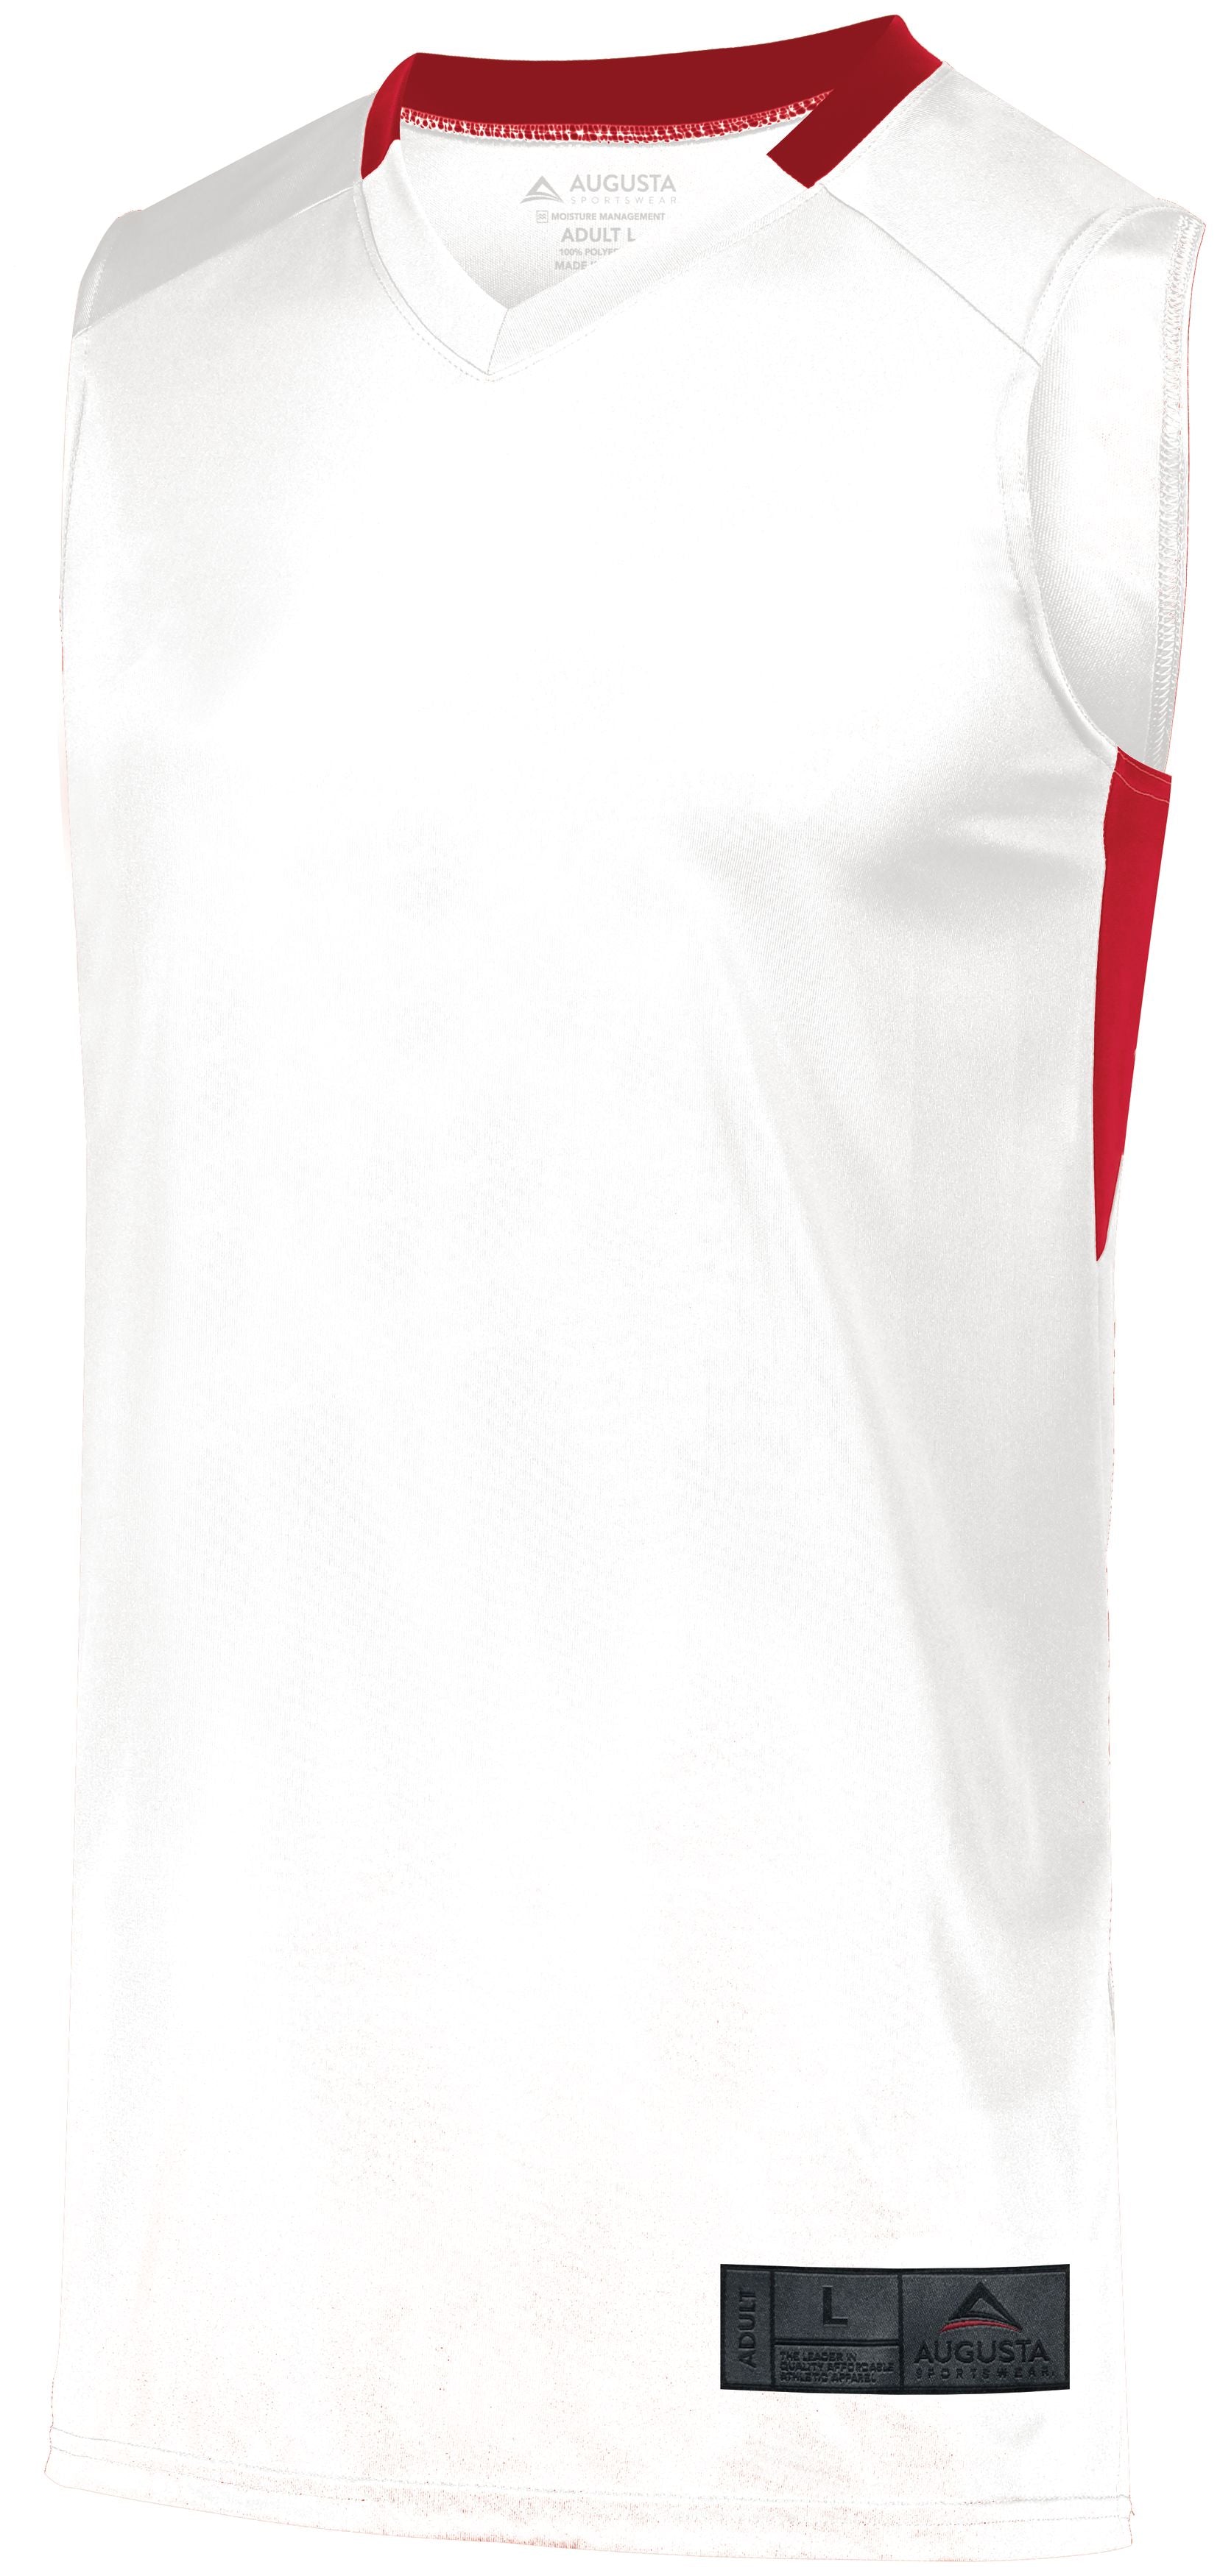 Augusta Sportswear Step-Back Basketball Jersey in White/Red  -Part of the Adult, Adult-Jersey, Augusta-Products, Basketball, Shirts, All-Sports, All-Sports-1 product lines at KanaleyCreations.com